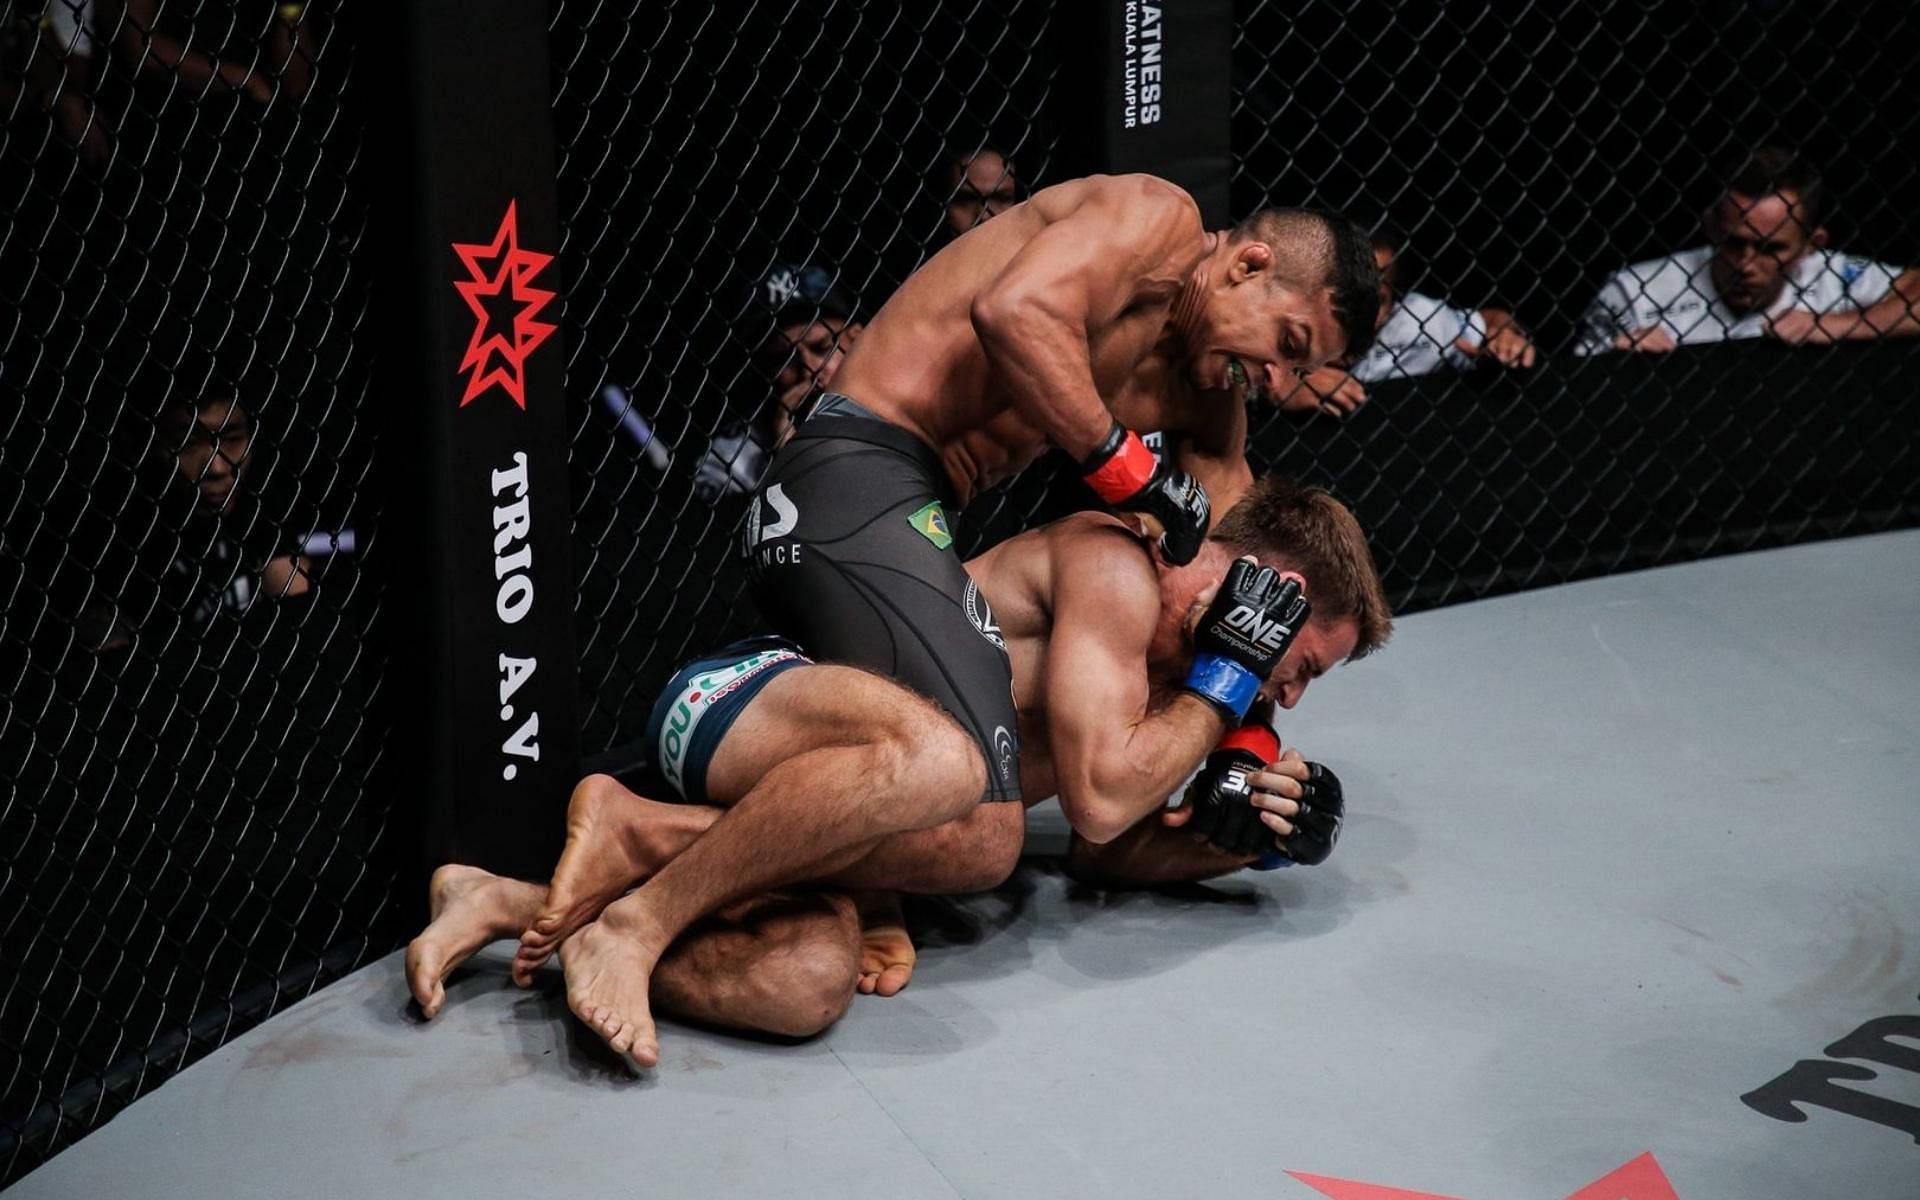 ONE bantamweight champion Bibiano Fernandes (top) will look to defend his title against bitter rival John Lineker at ONE: Bad Blood. (Image courtesy of ONE Championship)